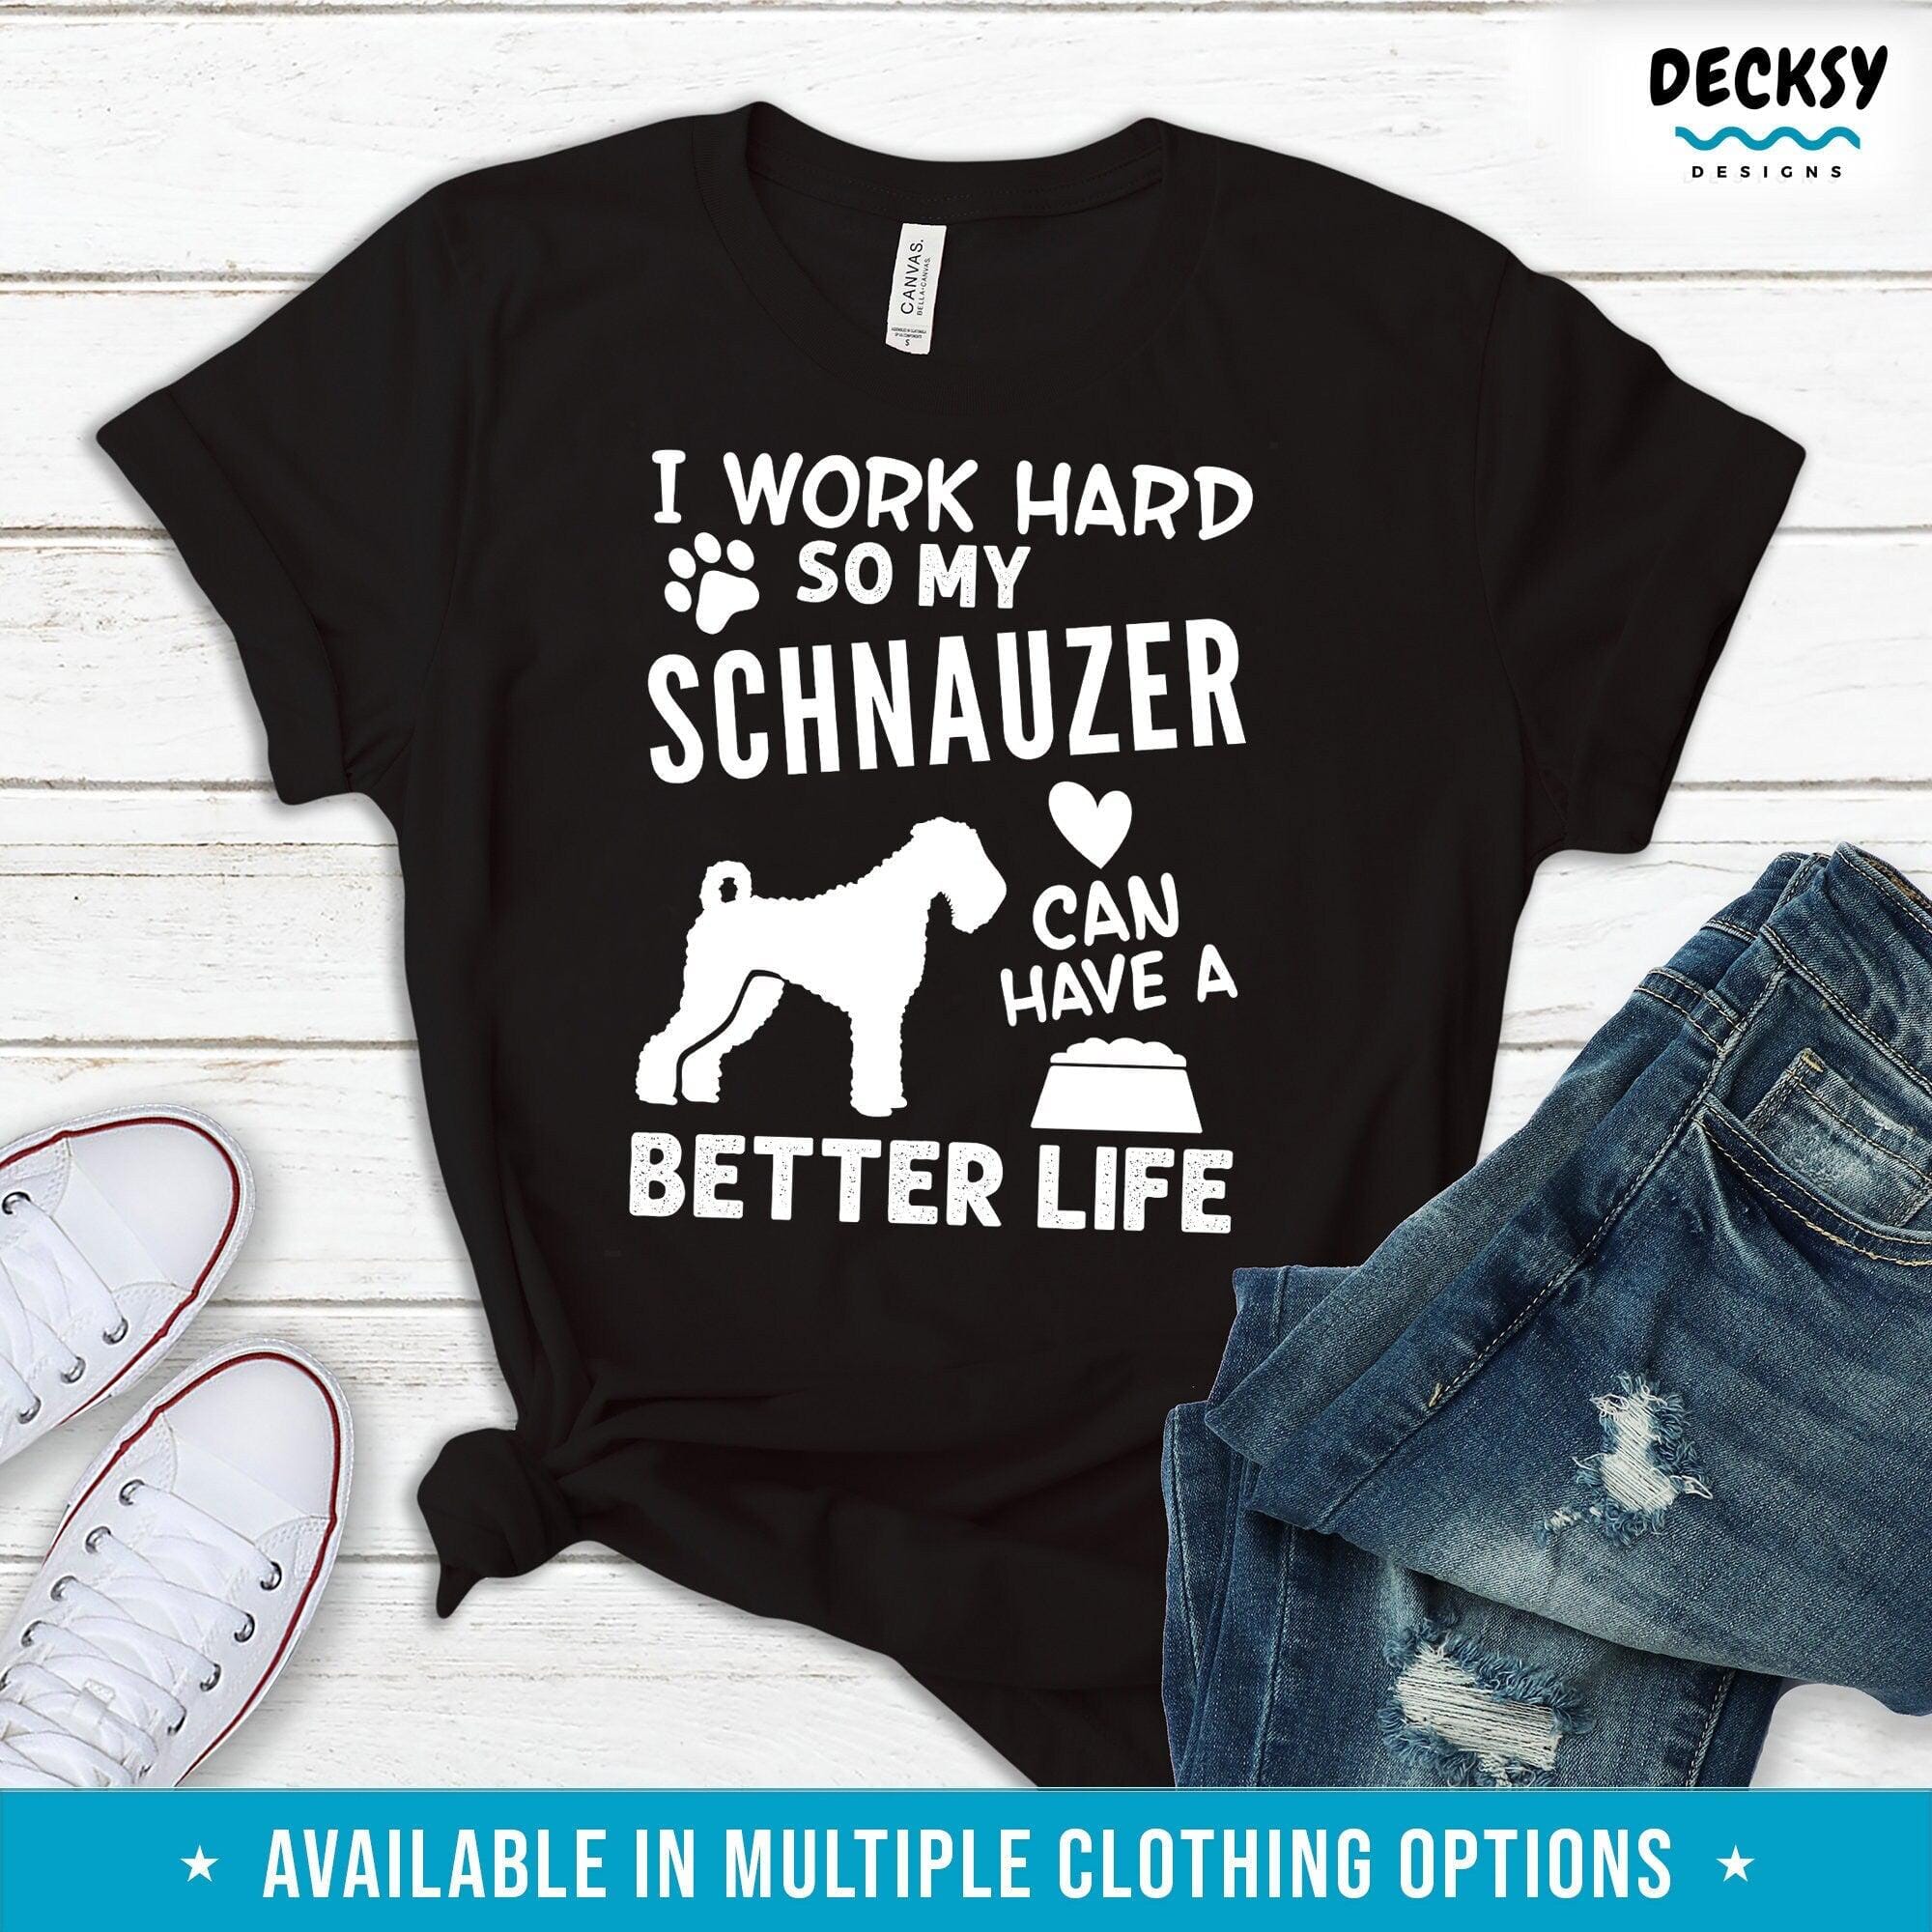 Schnauzer Tshirt, Gift For Dog Lover-Clothing:Gender-Neutral Adult Clothing:Tops & Tees:T-shirts:Graphic Tees-DecksyDesigns